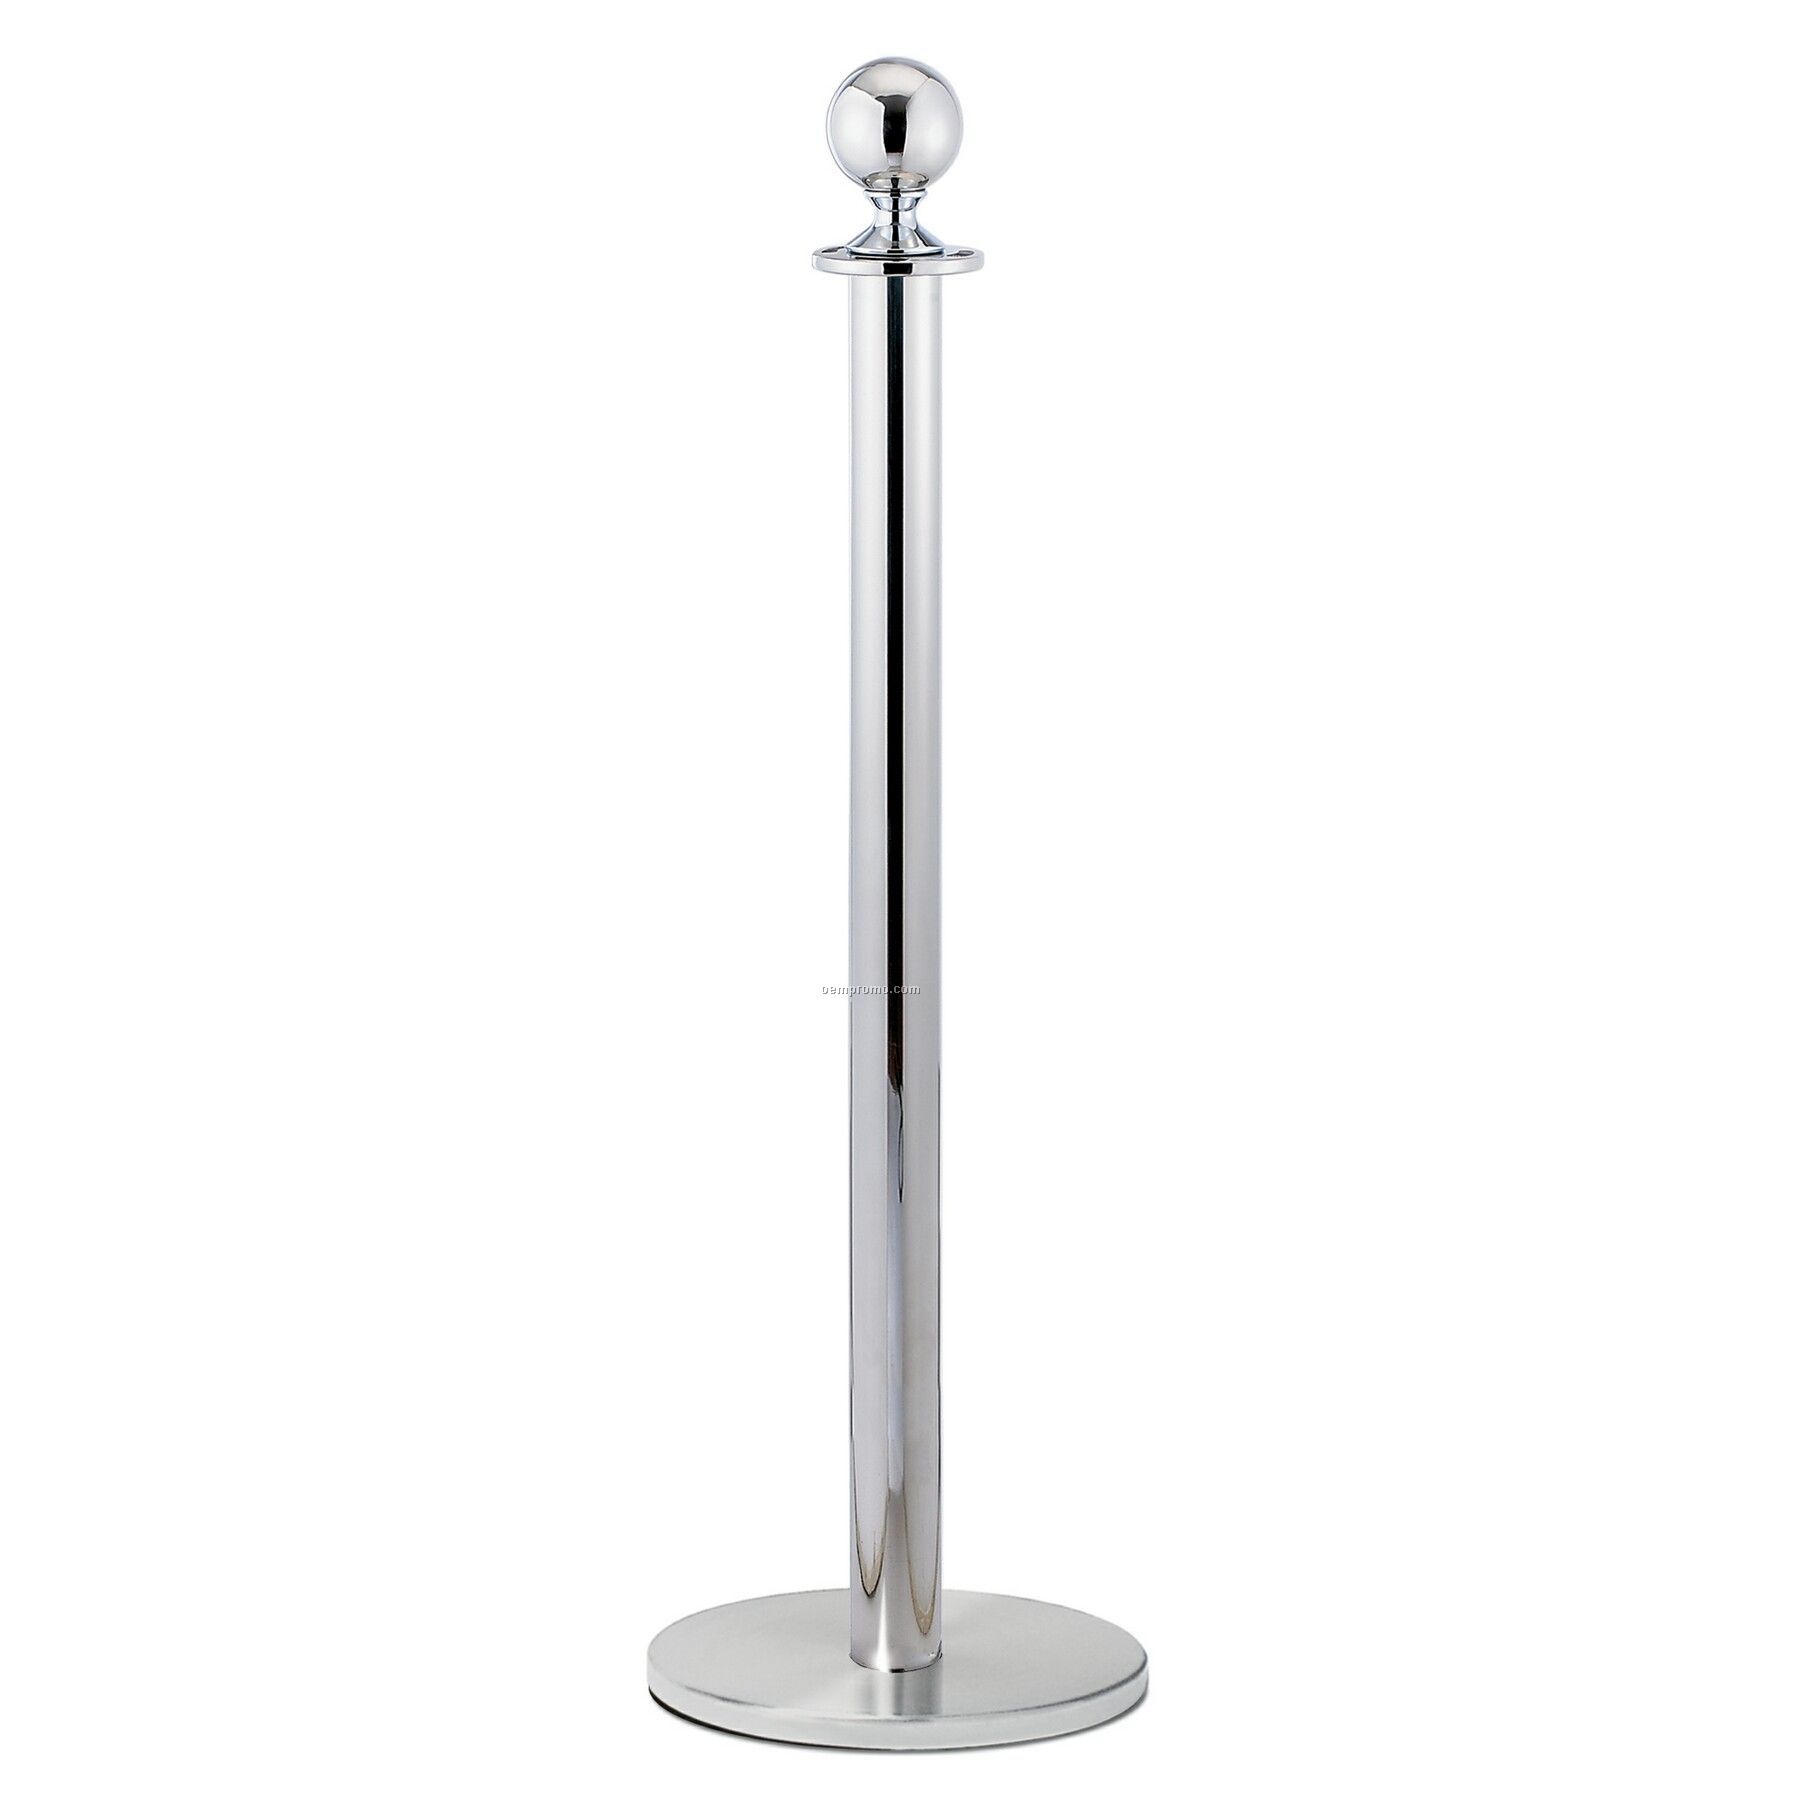 Guidelines Rope Stanchion - Chrome Finish Pole & Base With Ball Top